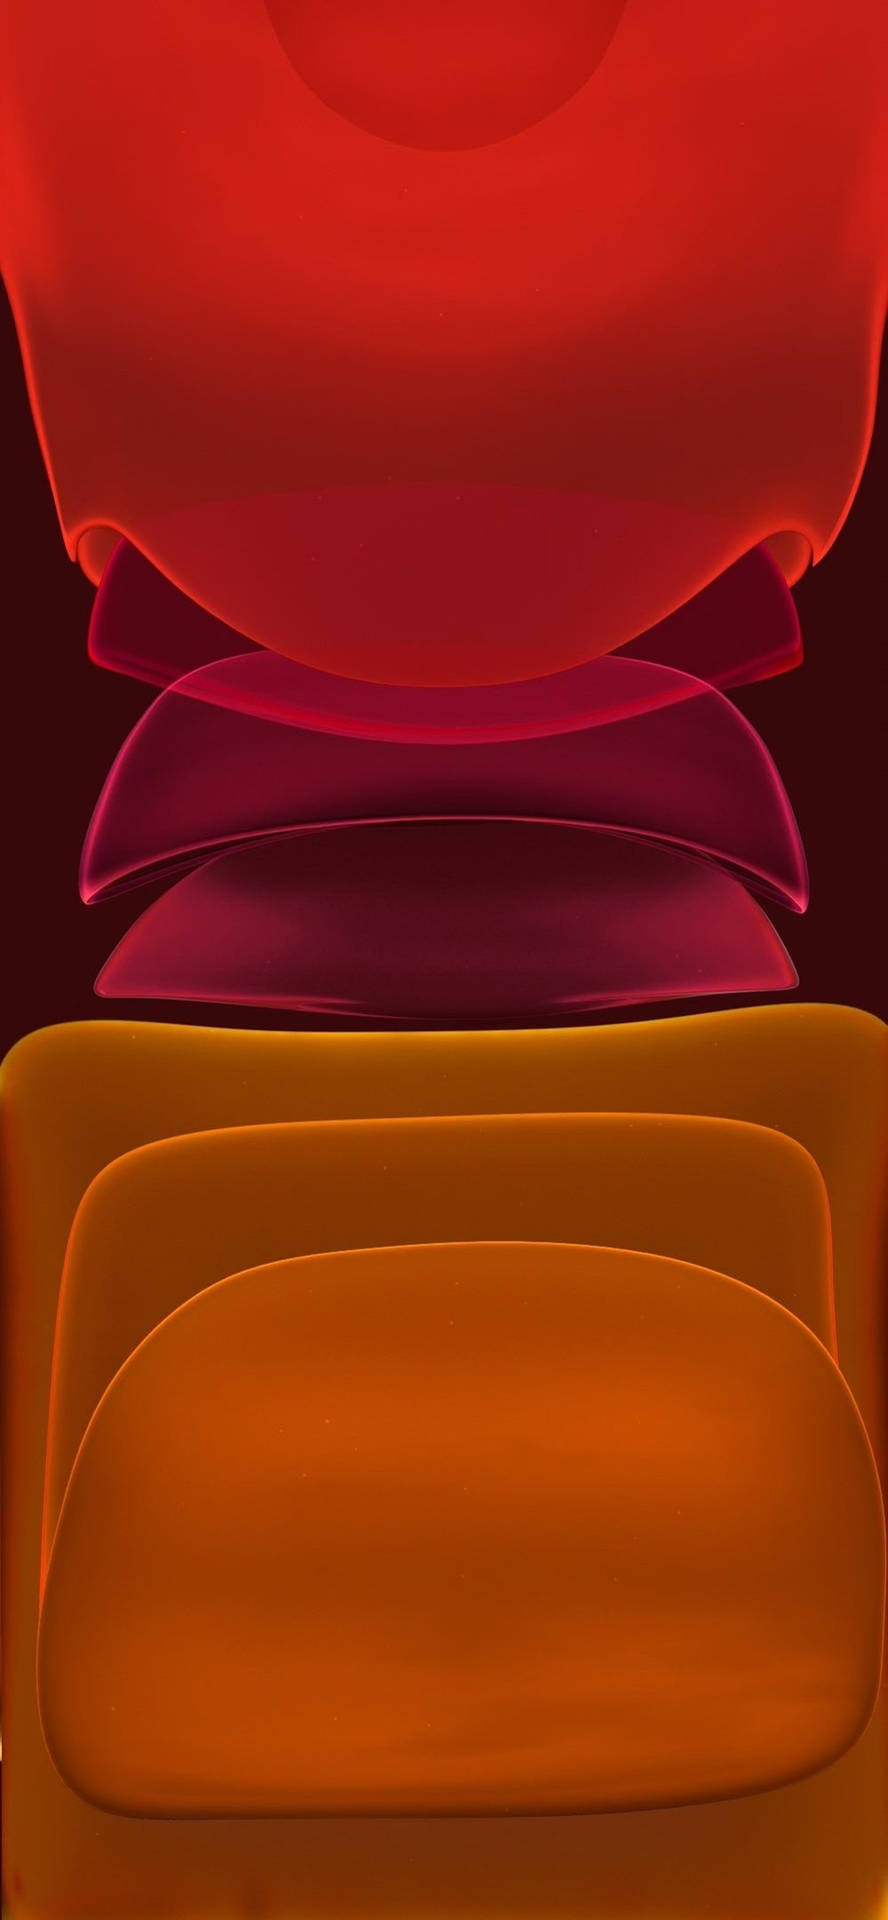 Cool Iphone 11 Orange And Red Blobs